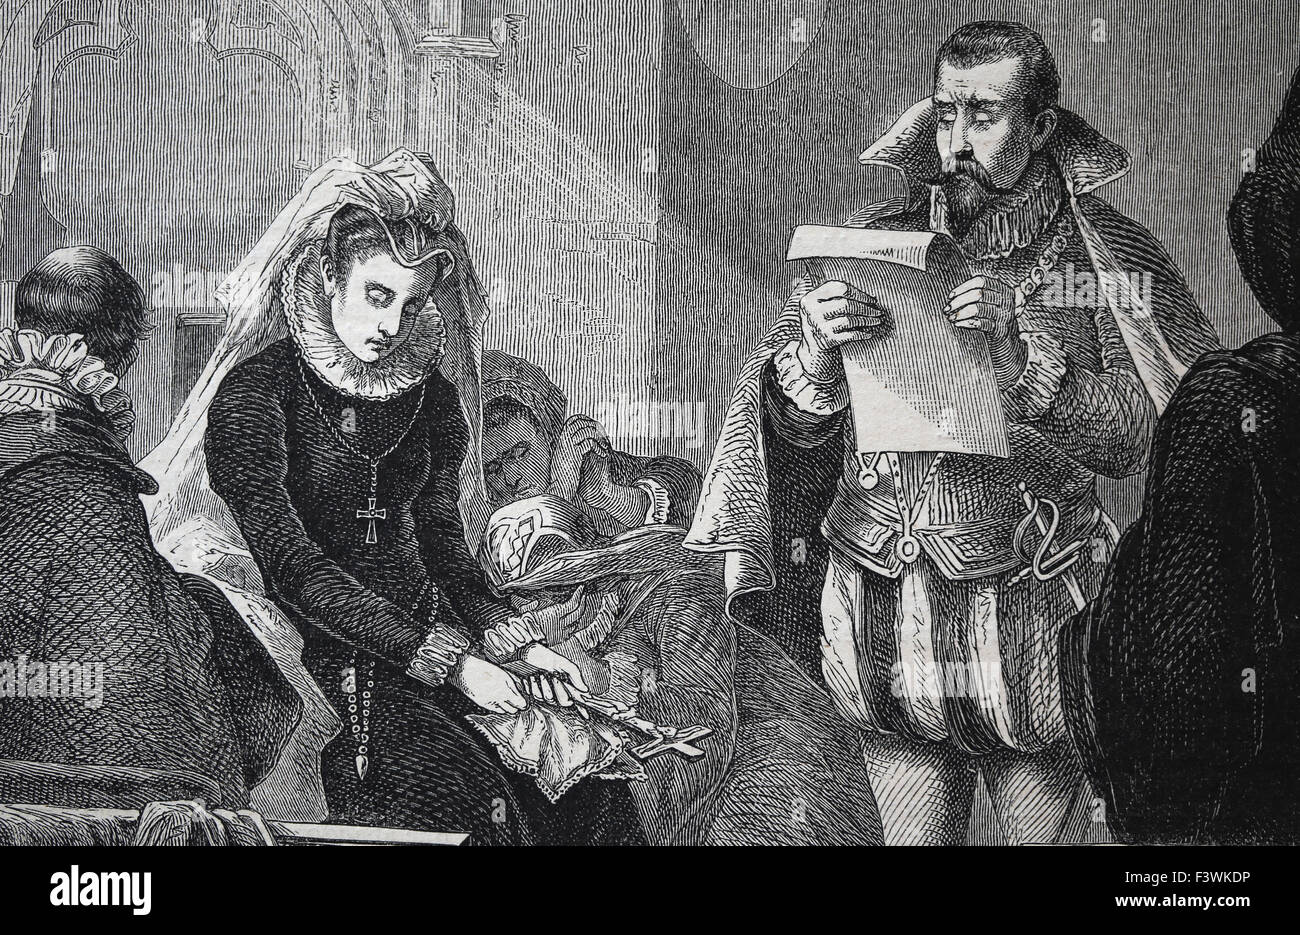 Queen of Scotland Mary Stuart (1542-1587). Sentencing death. Engraving by P. Sporrer. Almanac. The Illustration, 1880, Spain. Stock Photo